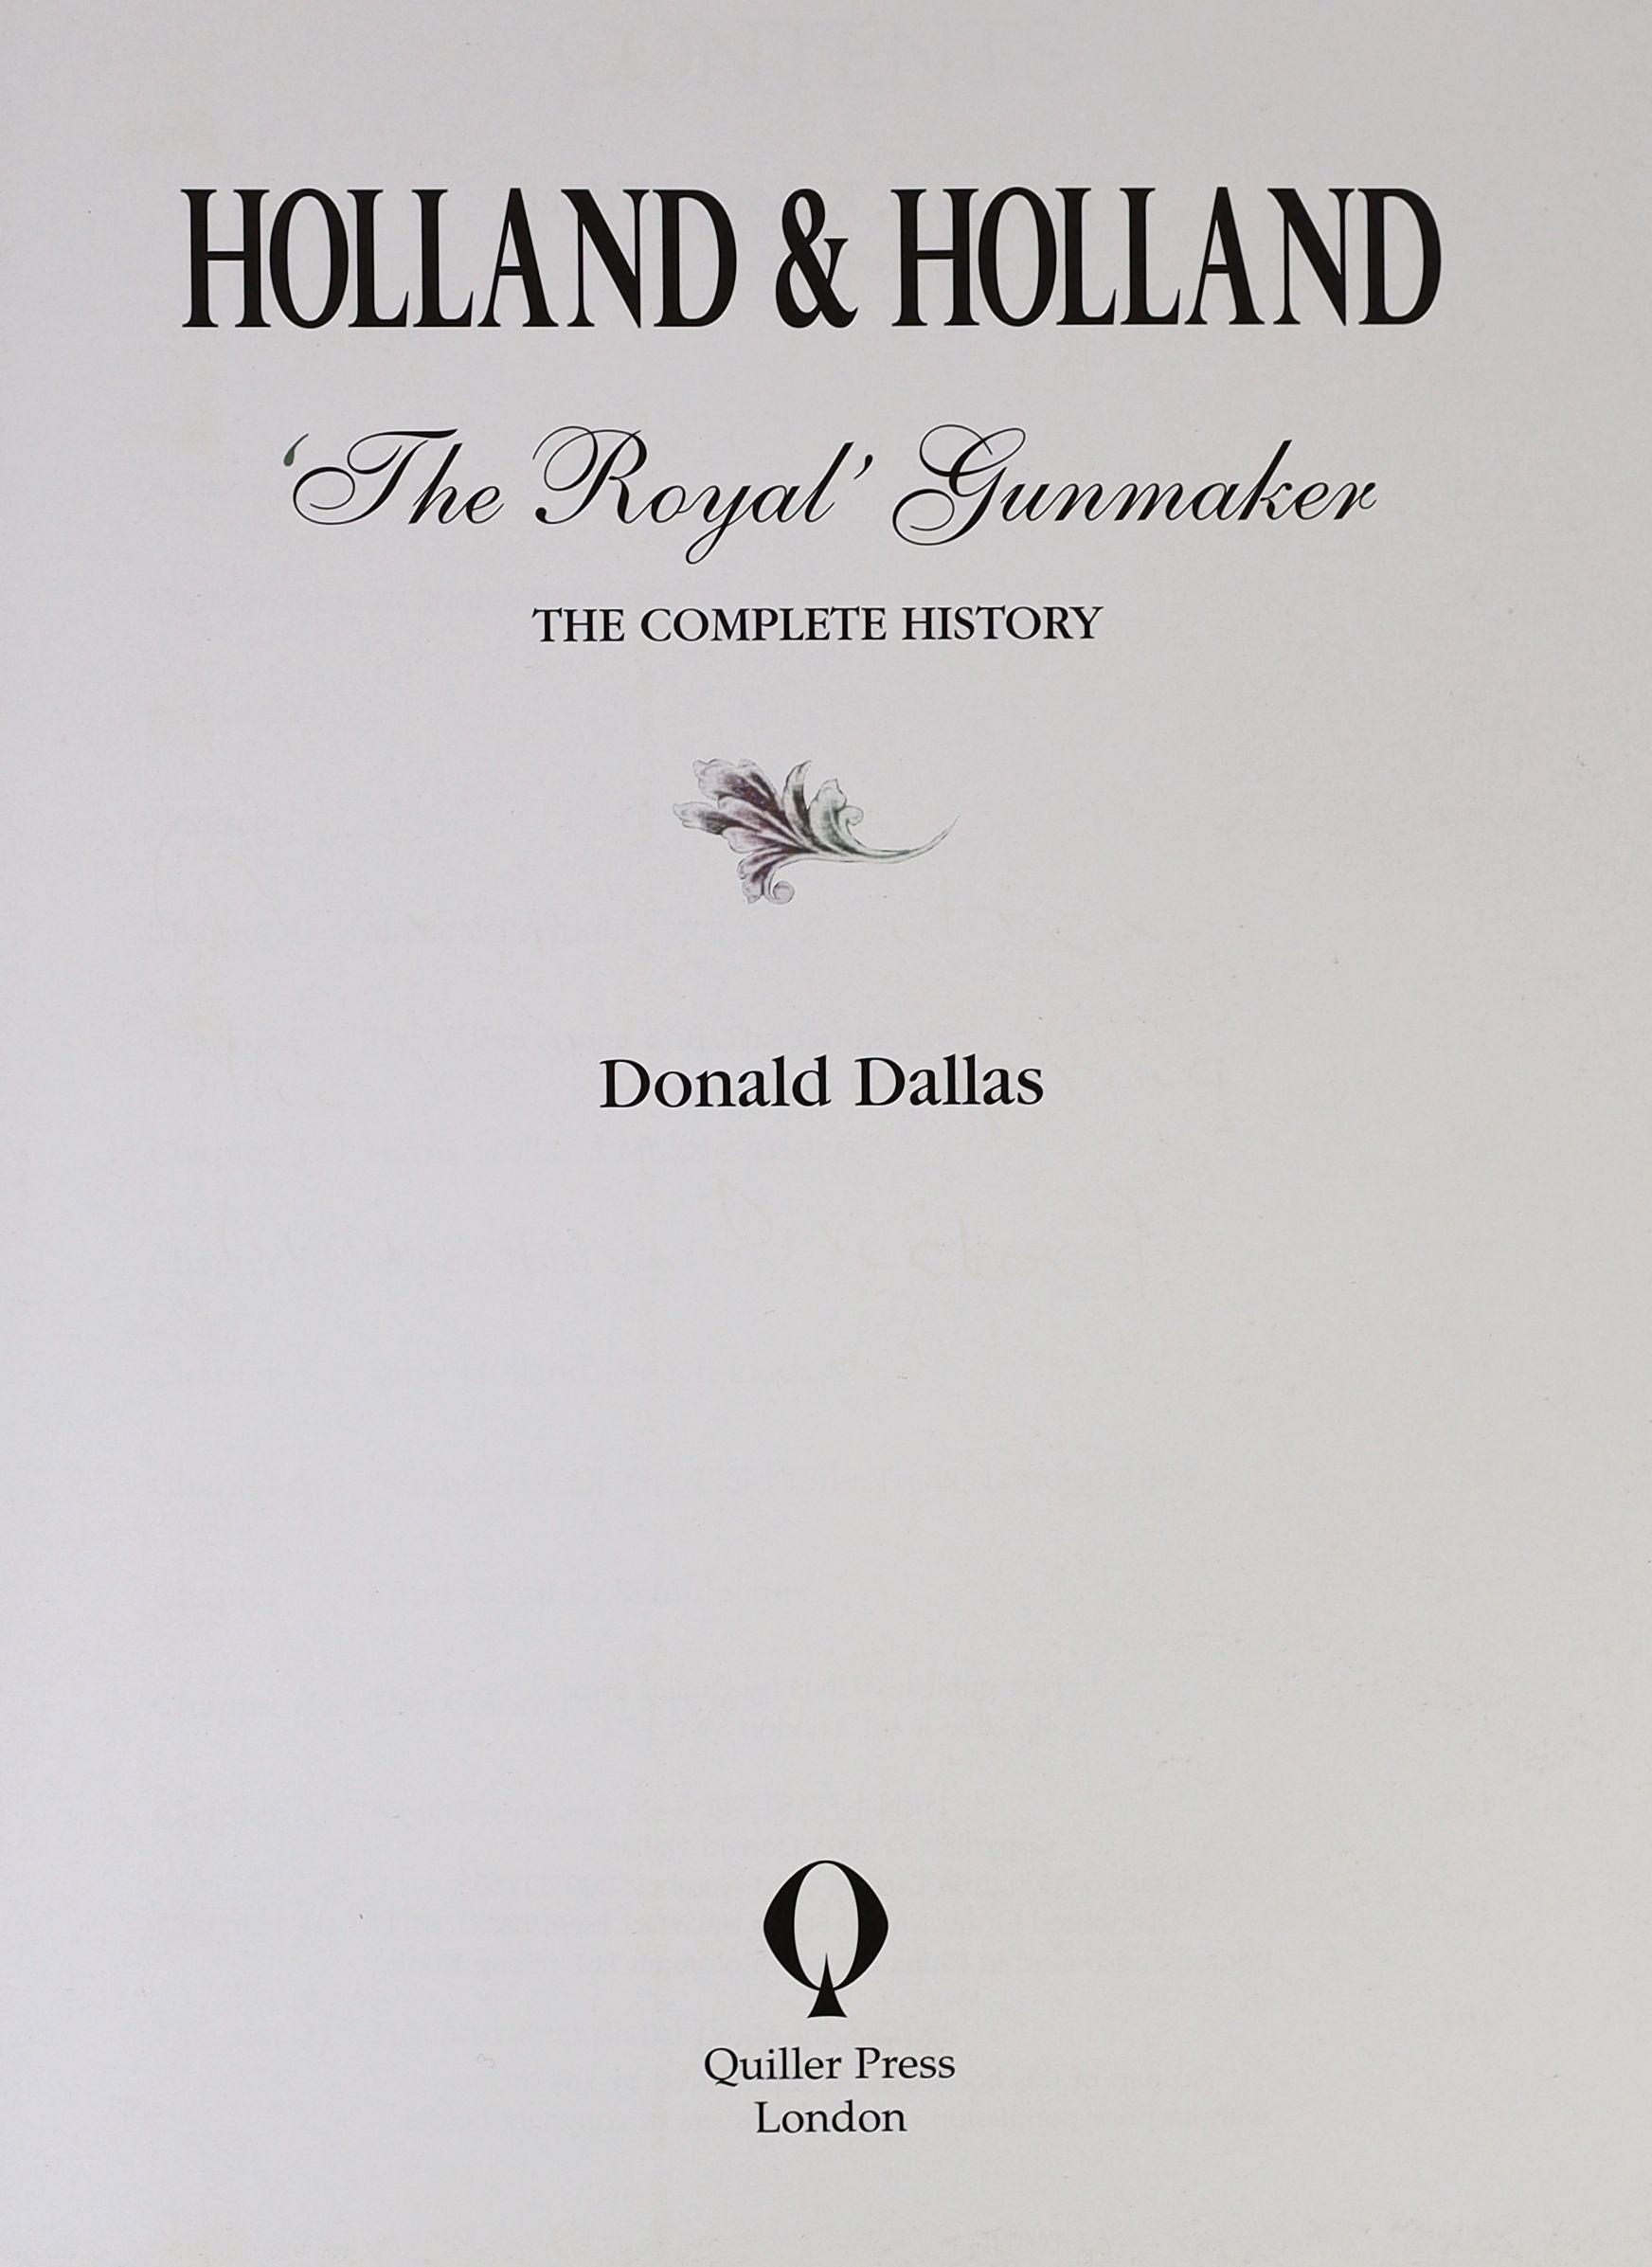 Dallas, Donald Holland & Holland ‘The Royal’ Gunmaker. The Complete History. London, 2003. Original cloth in dust wrapper. Signed presentation inscription to Malcolm Lyell from Daryl Greatrex, M. D. of Holland & Holland.